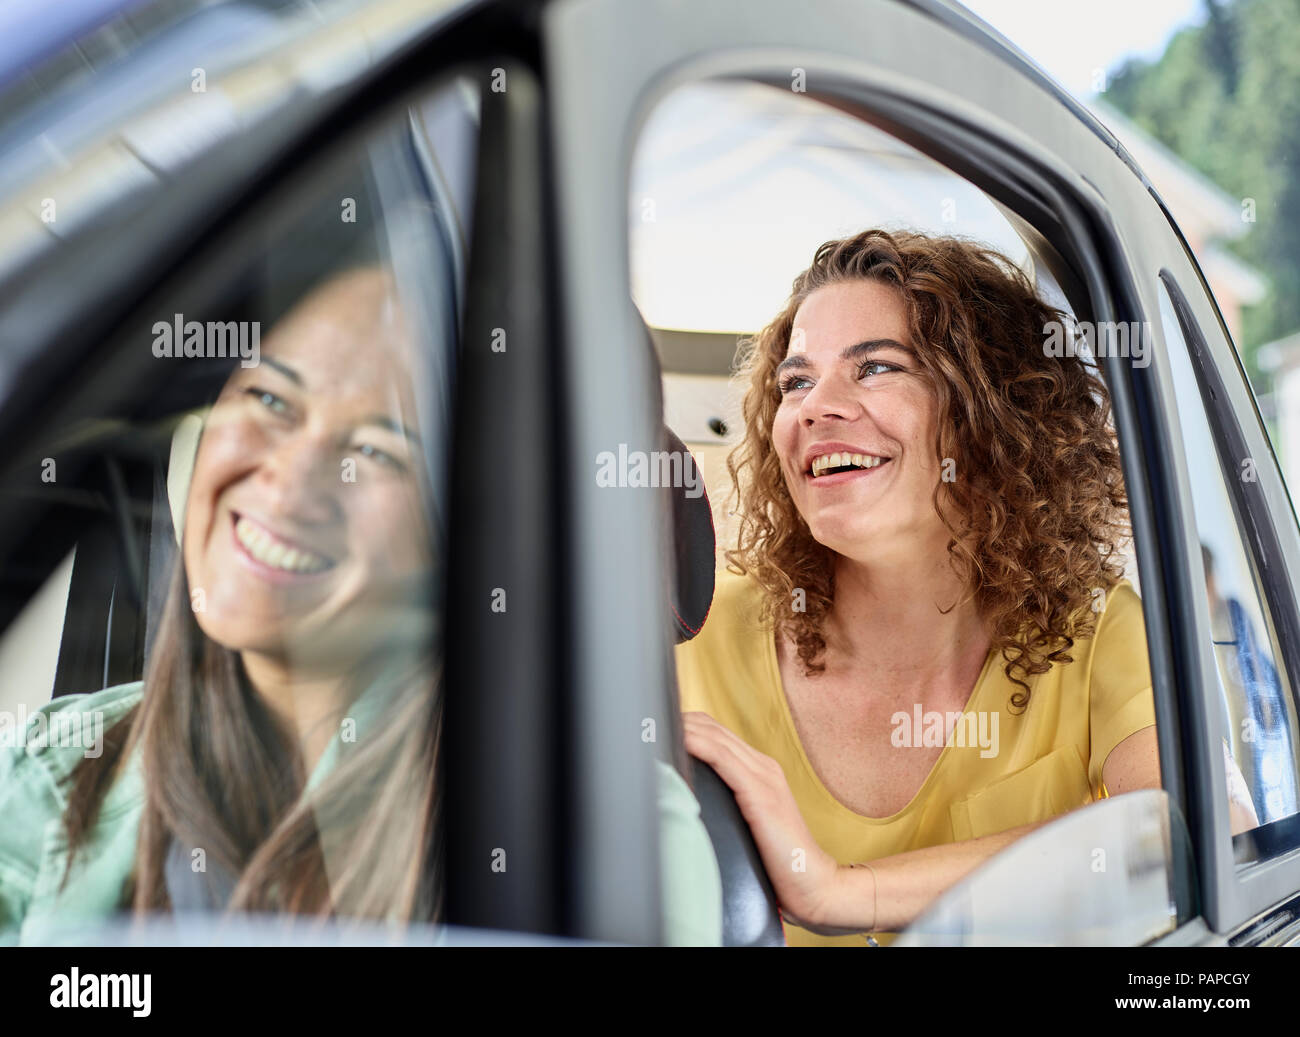 Two happy women in electric bubble car Stock Photo